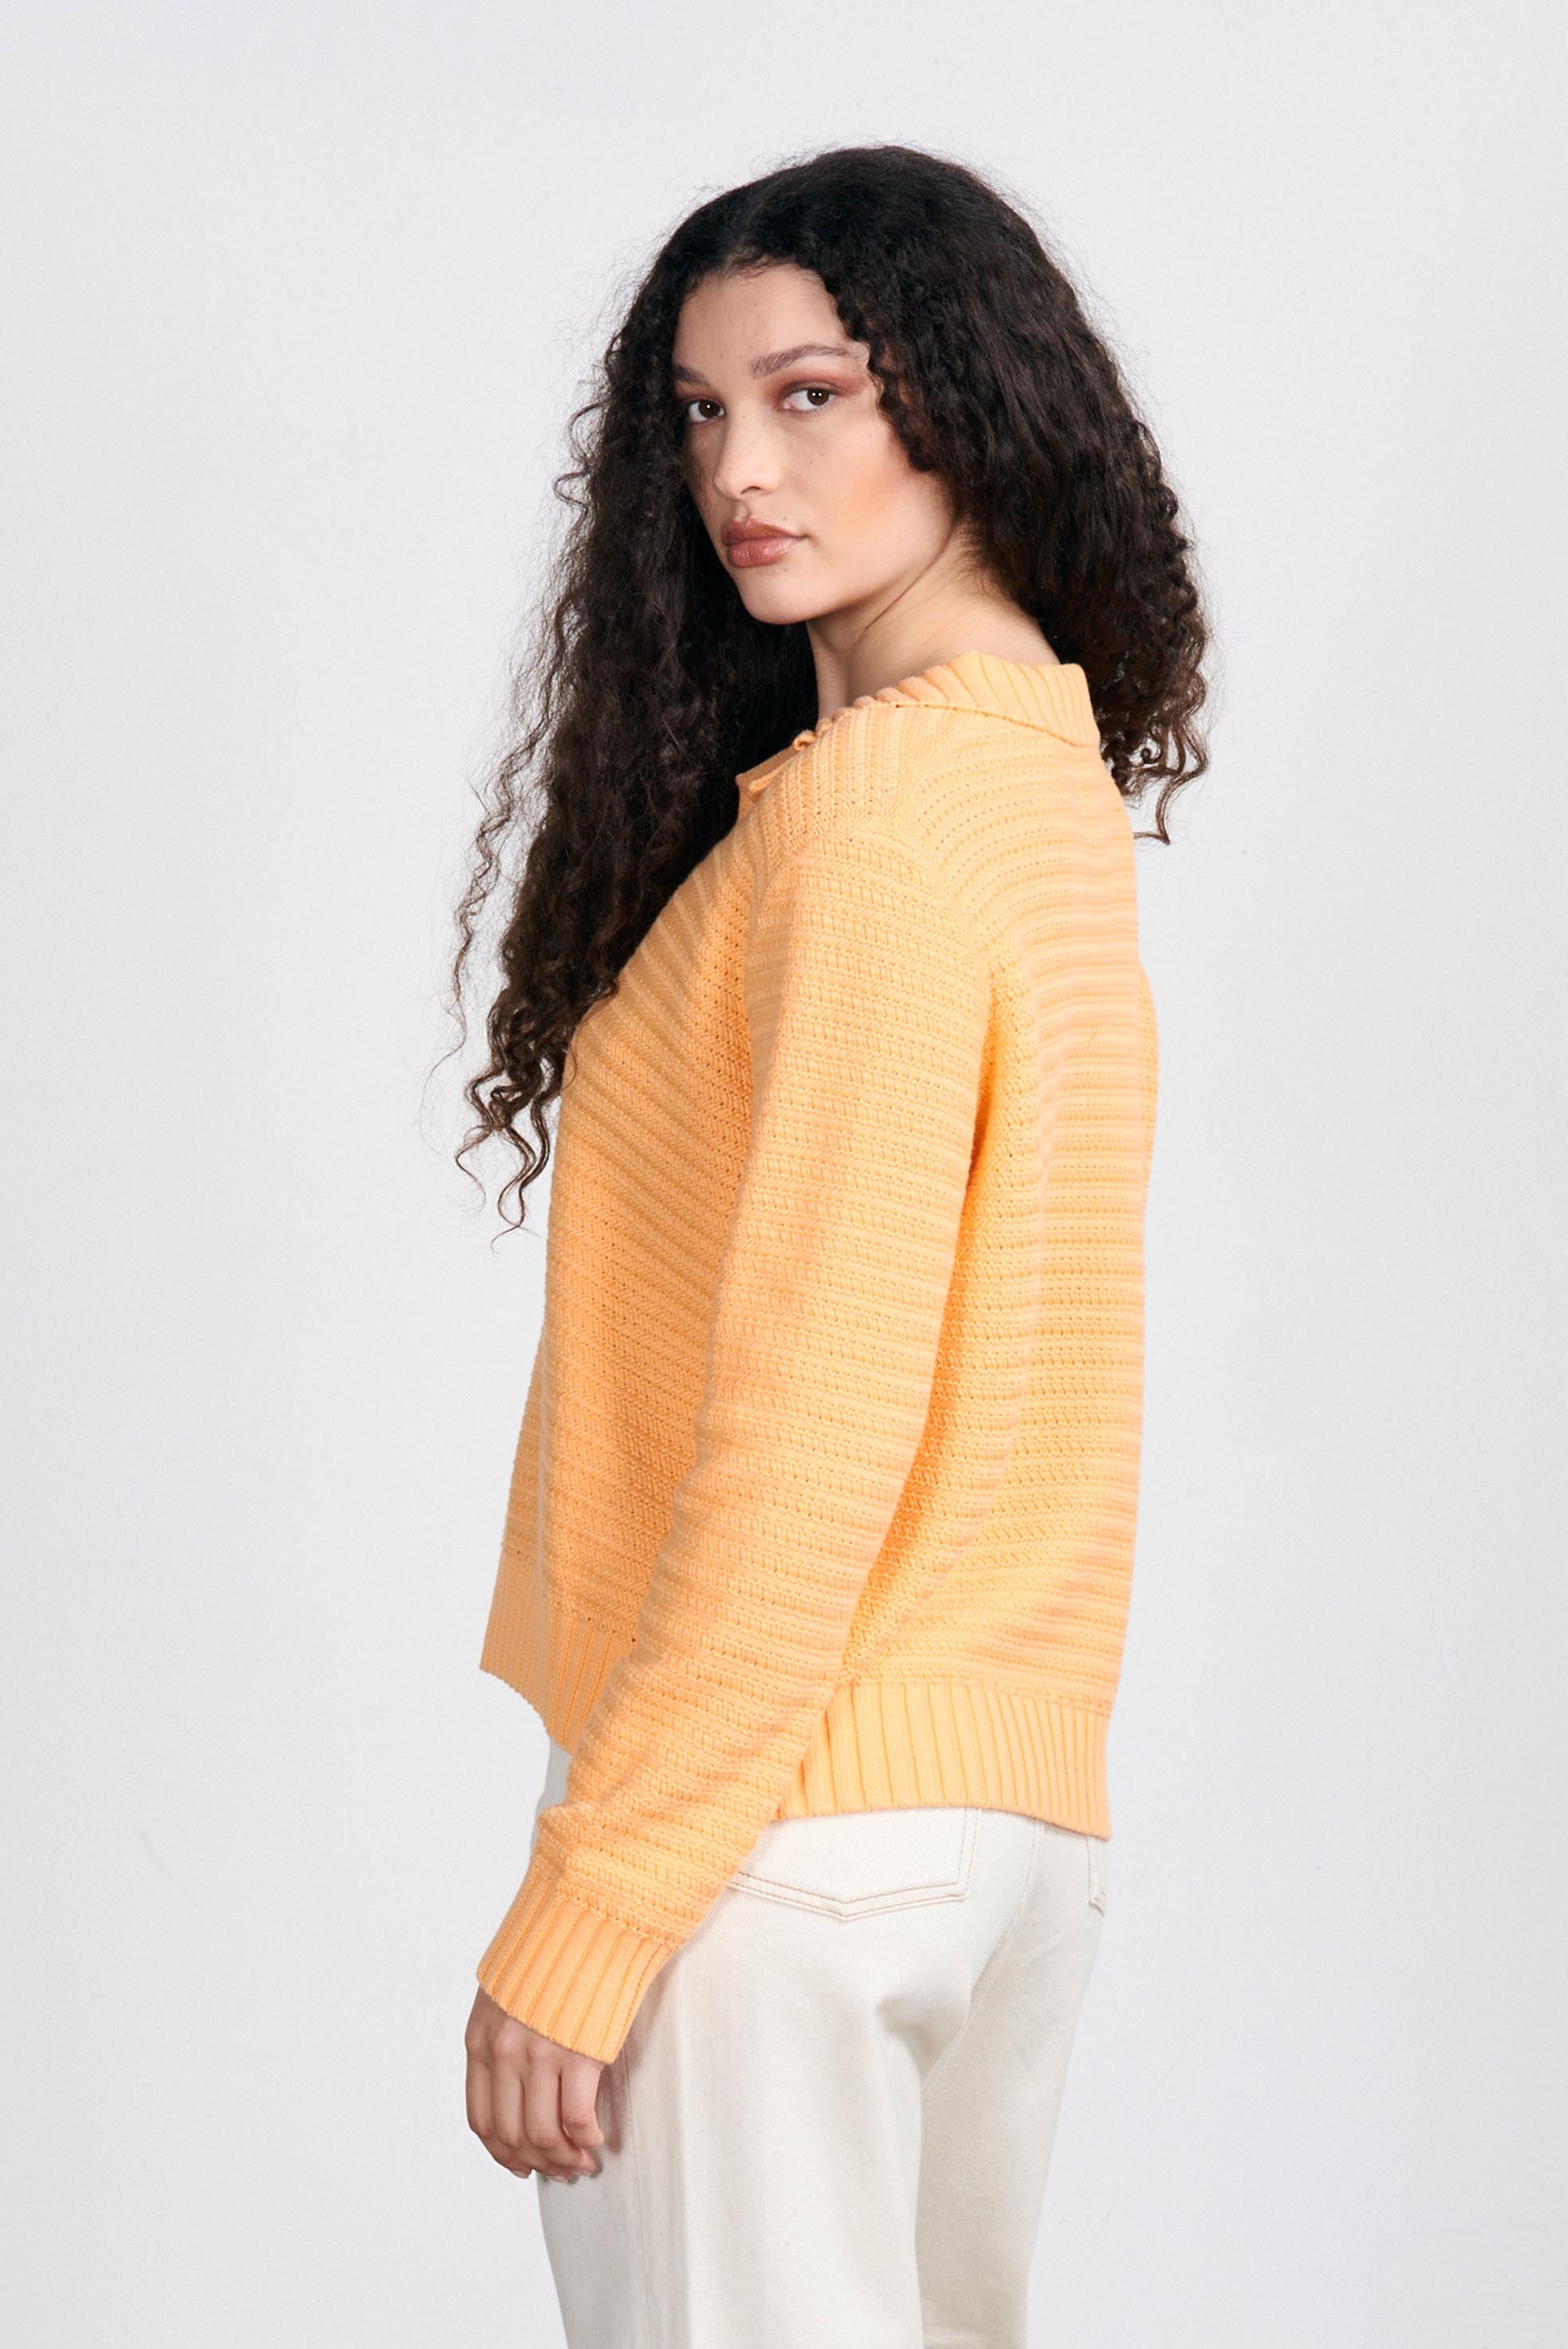 Brown haired female model wearing Jumper1234 Apricot cotton jumper with a collar in a fabulous all over herringbone stitch facing away from the camera